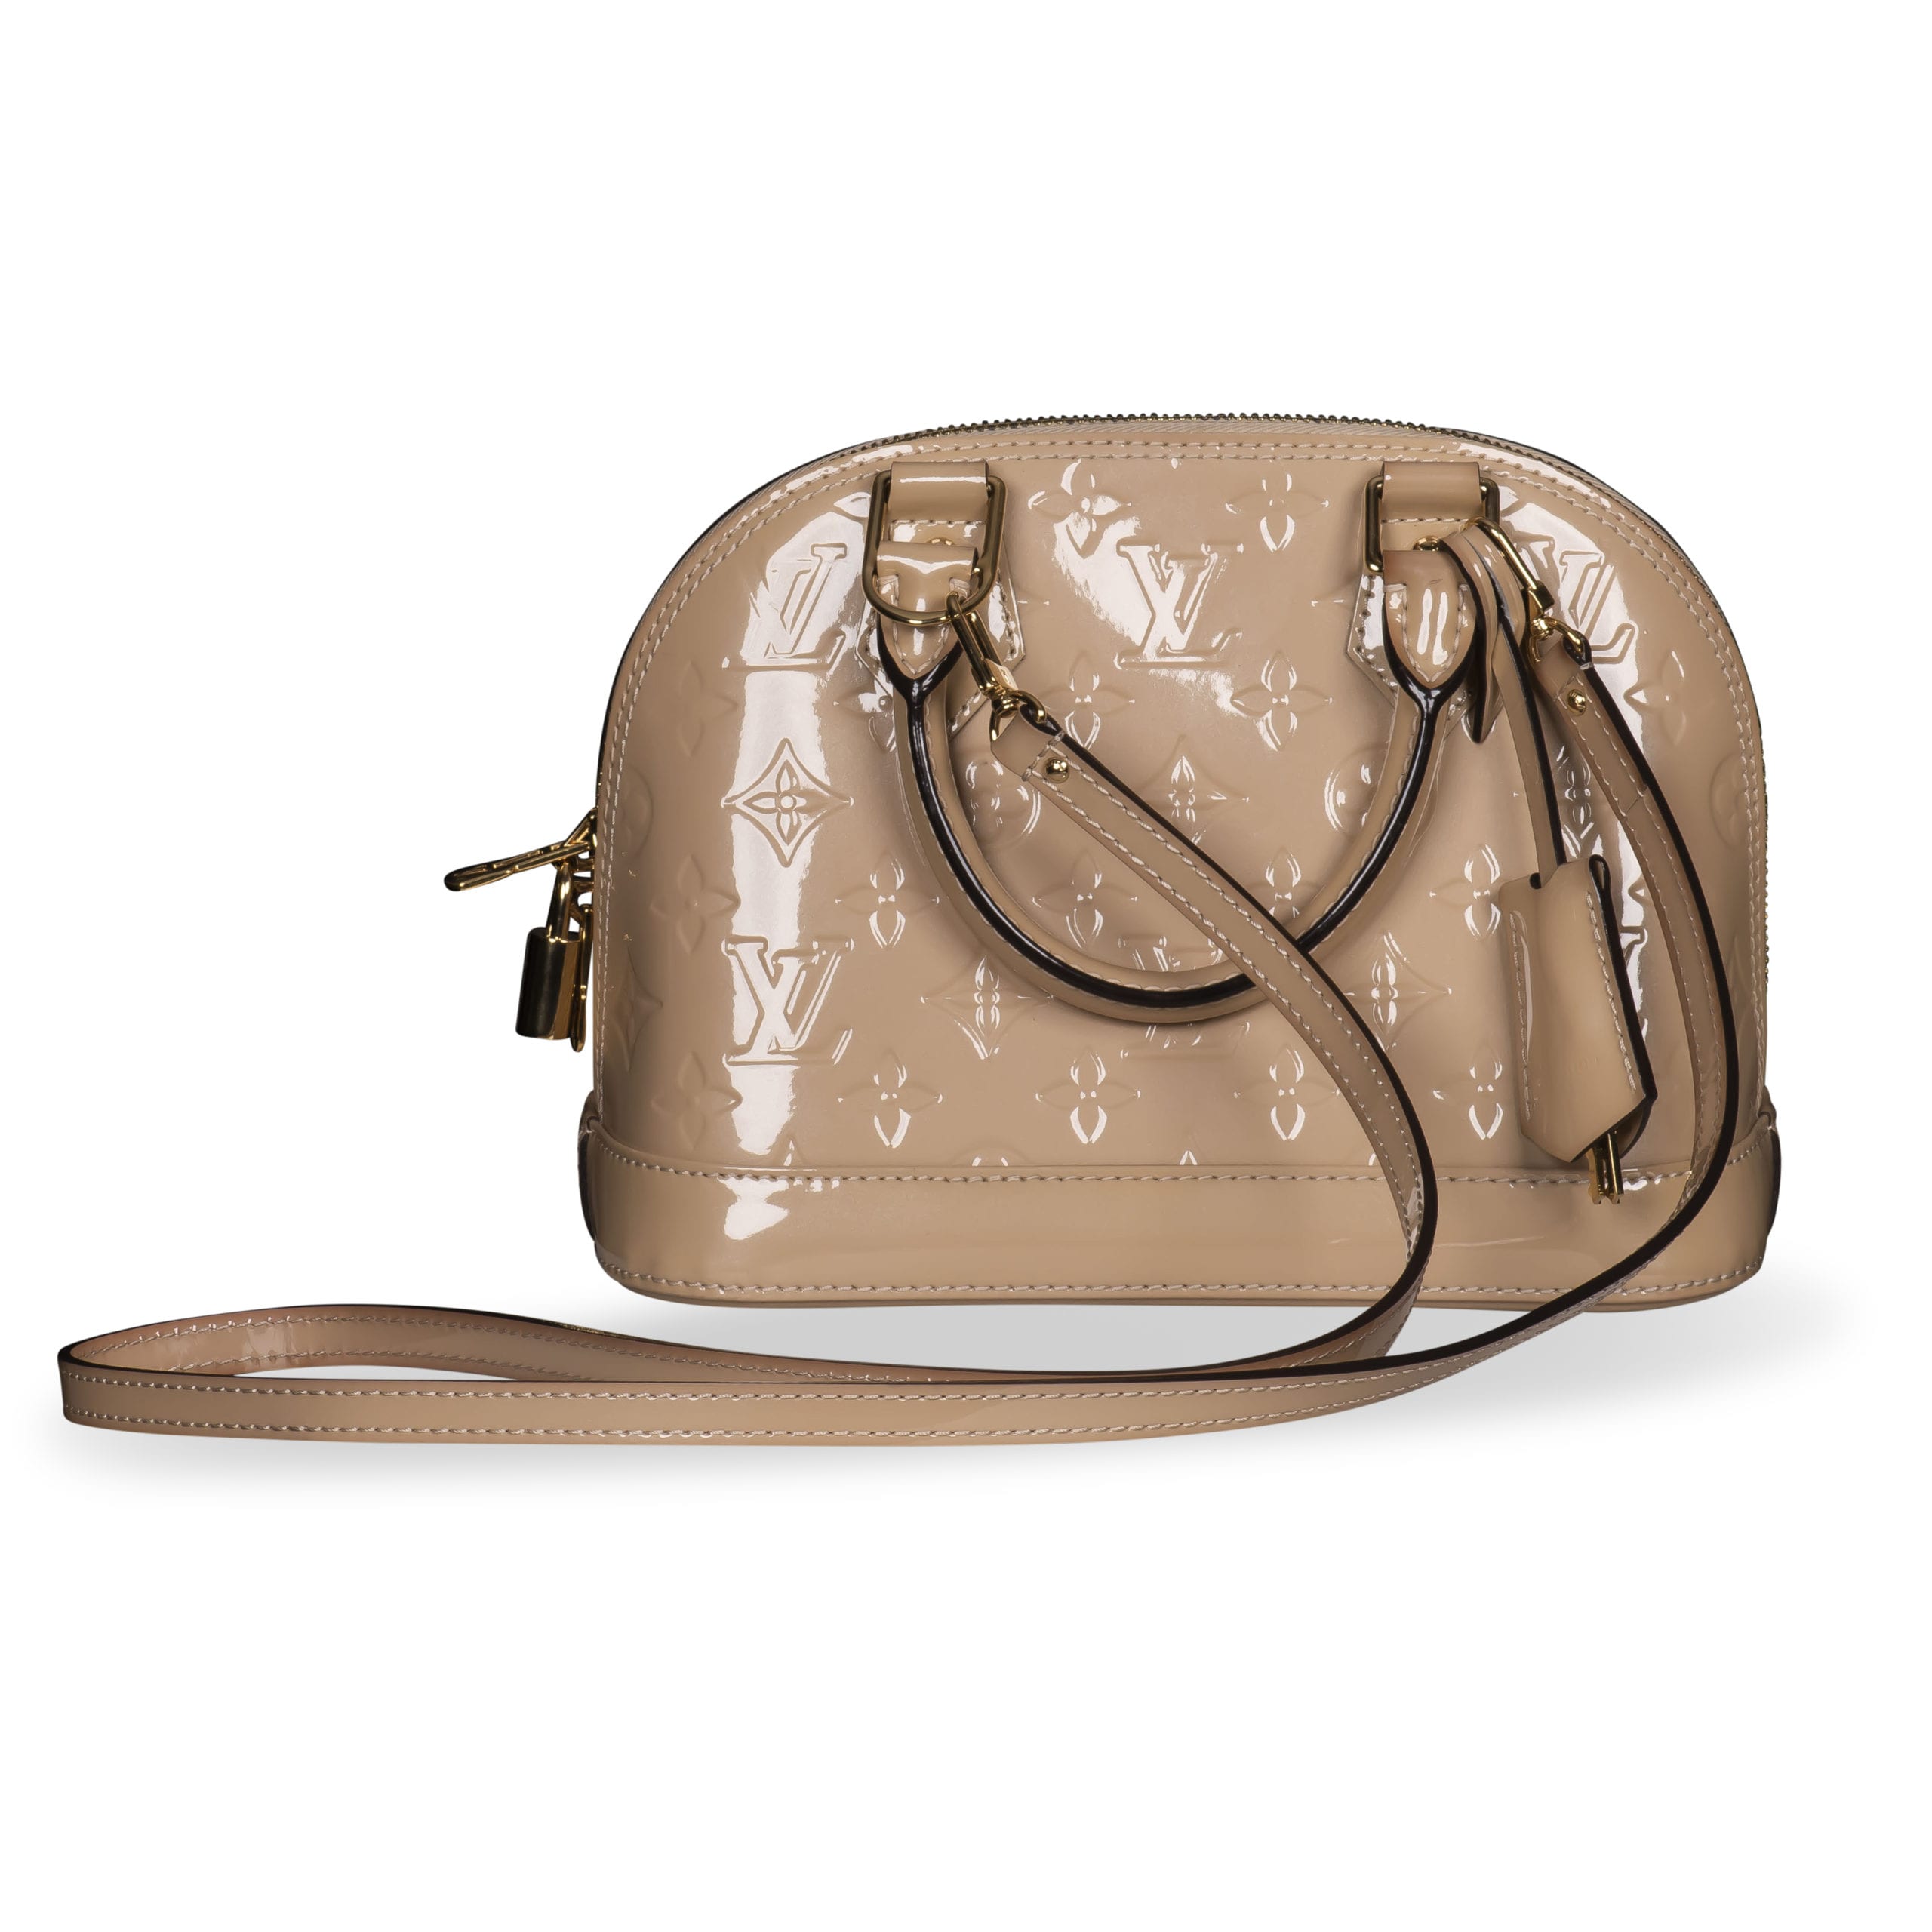 Louis Vuitton Vernis Alma Pm Beige With Gold Hardware